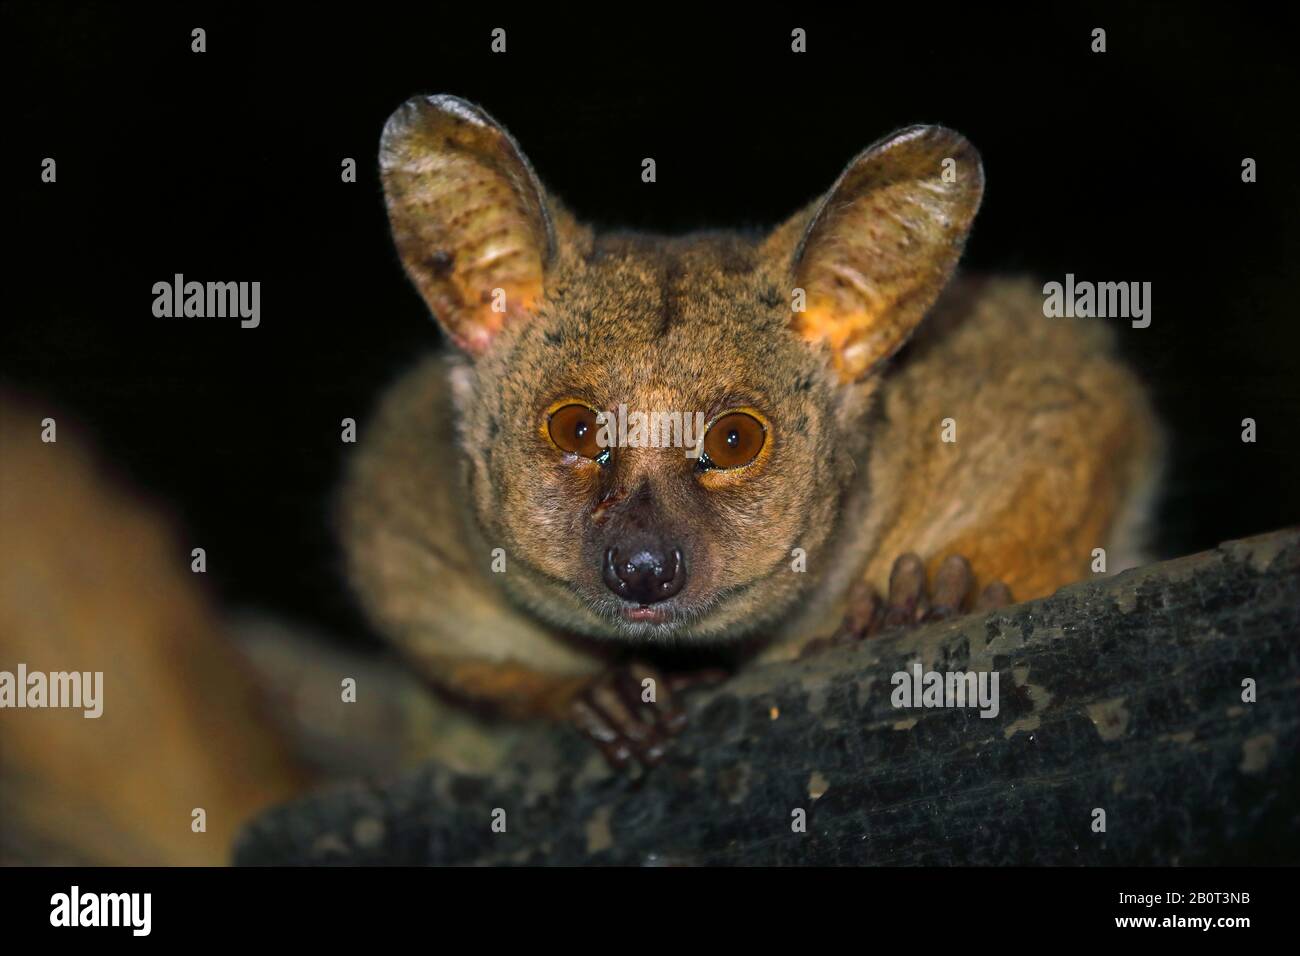 greater bush baby, greater galago, thick-tailed bush baby (Otolemur crassicaudatus, Galago crassicaudatus), portrait in the darkness, front view, South Africa, KwaZulu-Natal, Mkhuze Game Reserve Stock Photo